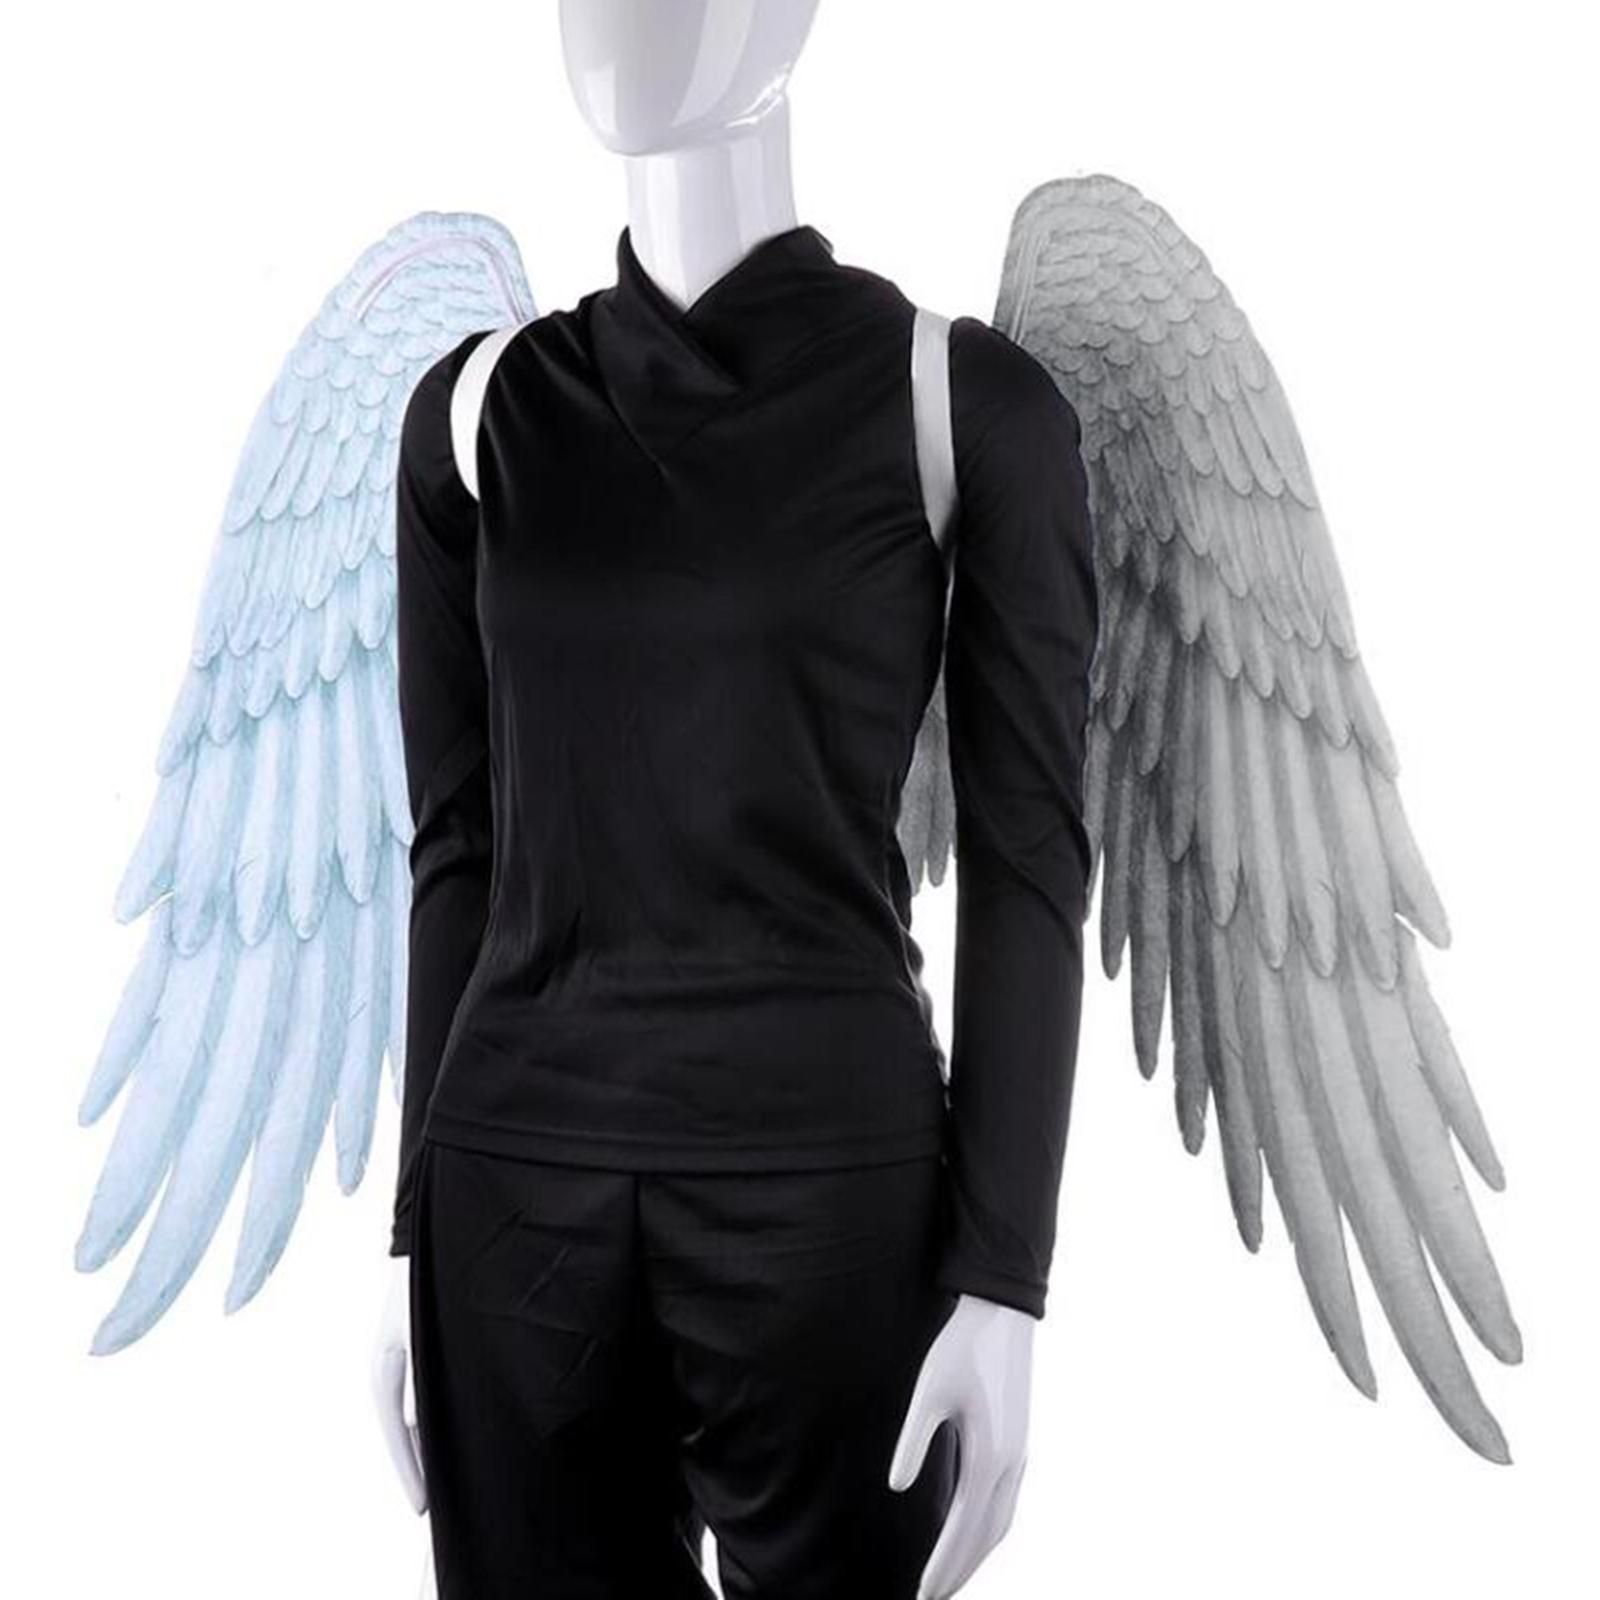 Angel  Costume Party Masquerade Cosplay Costume Accessory for Halloween